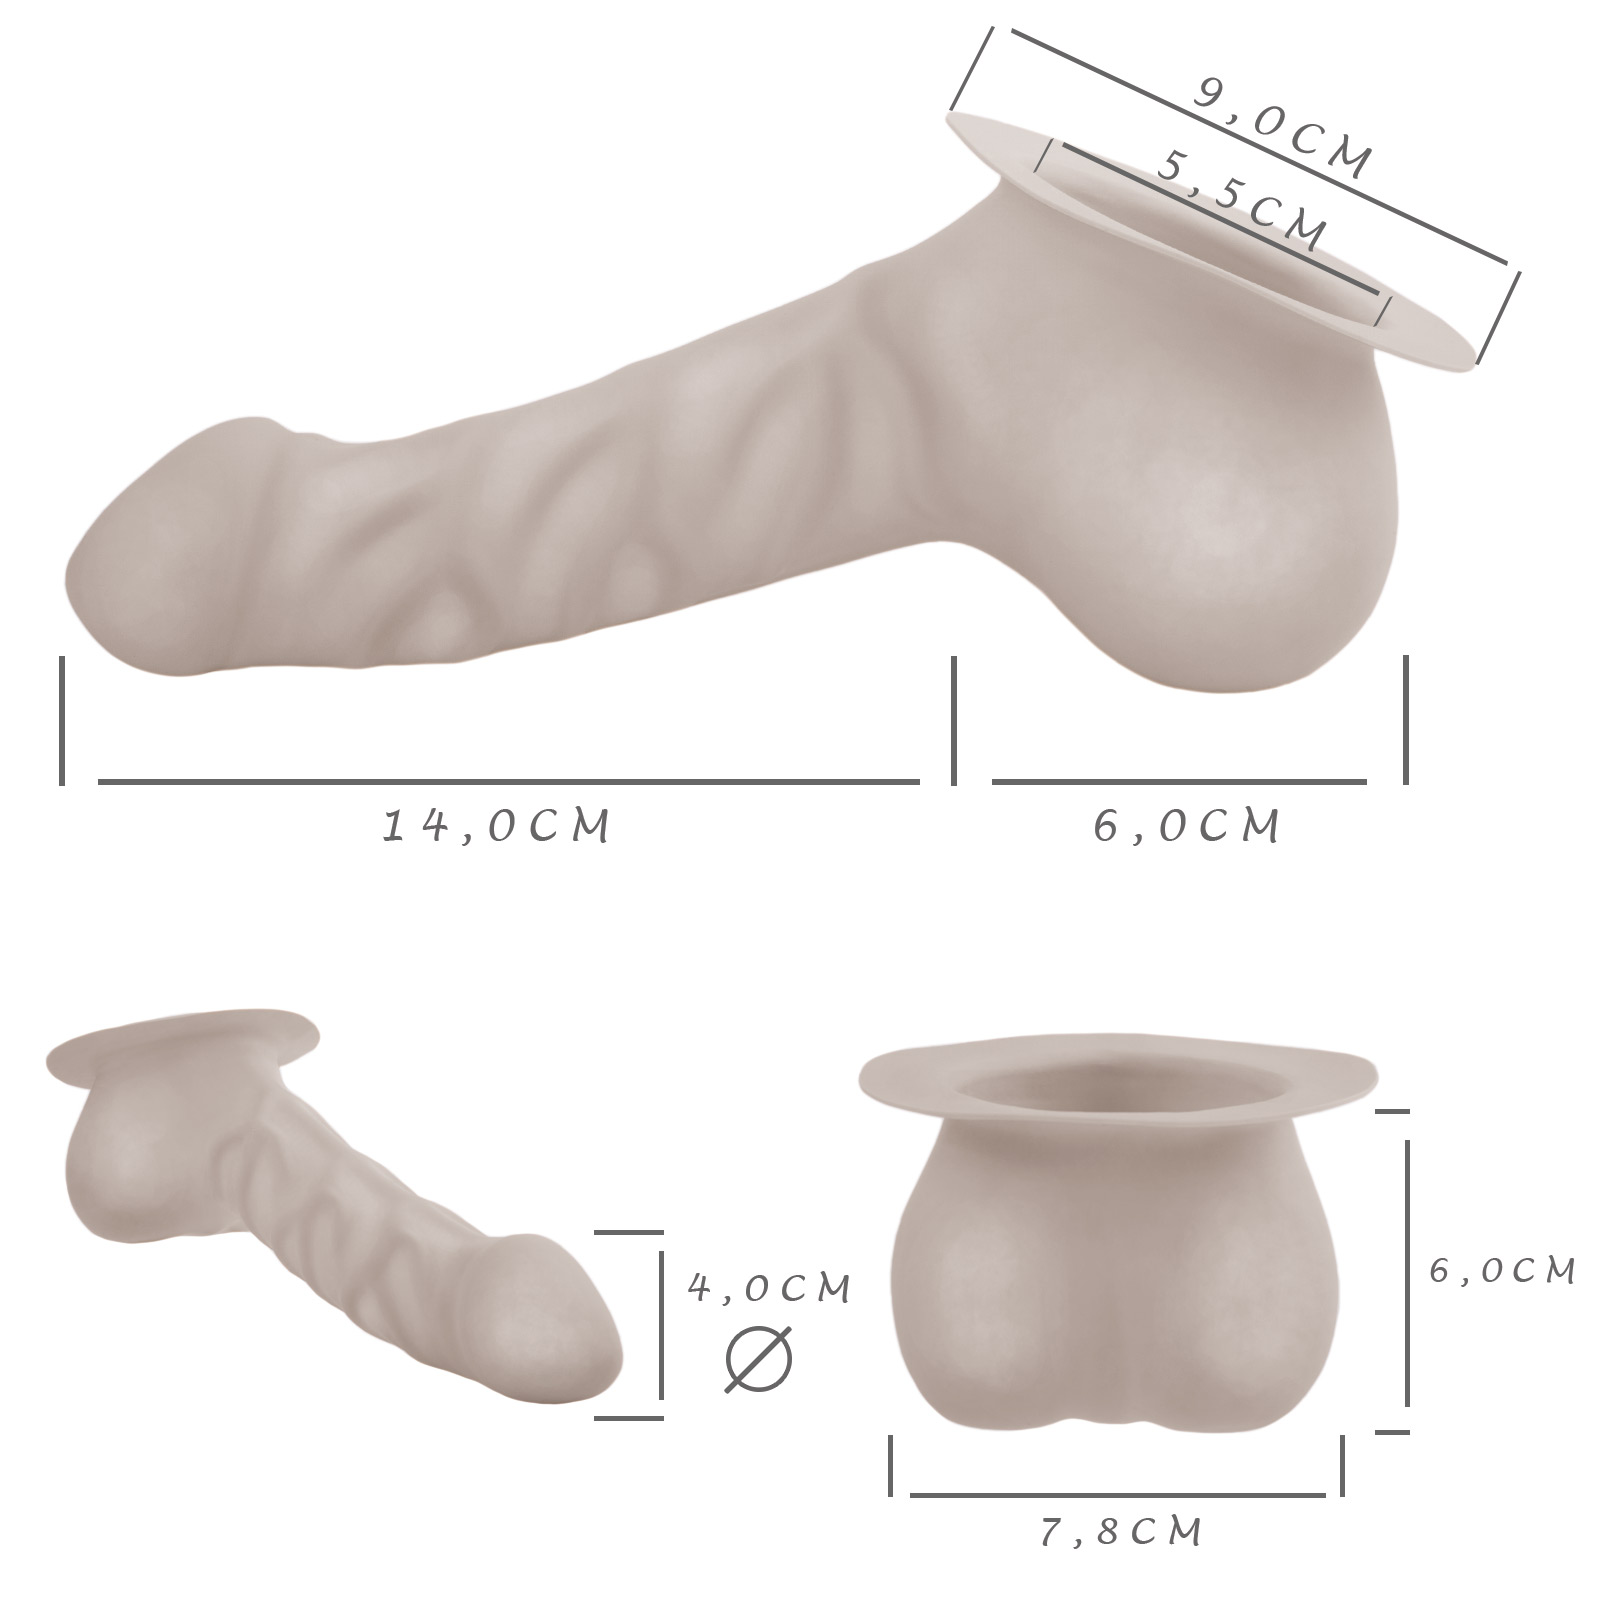 Toylie Latex Penis Sleeve «FRANZ» semi-transparent, with base plate for sticking to latex clothing - suitable for vegans